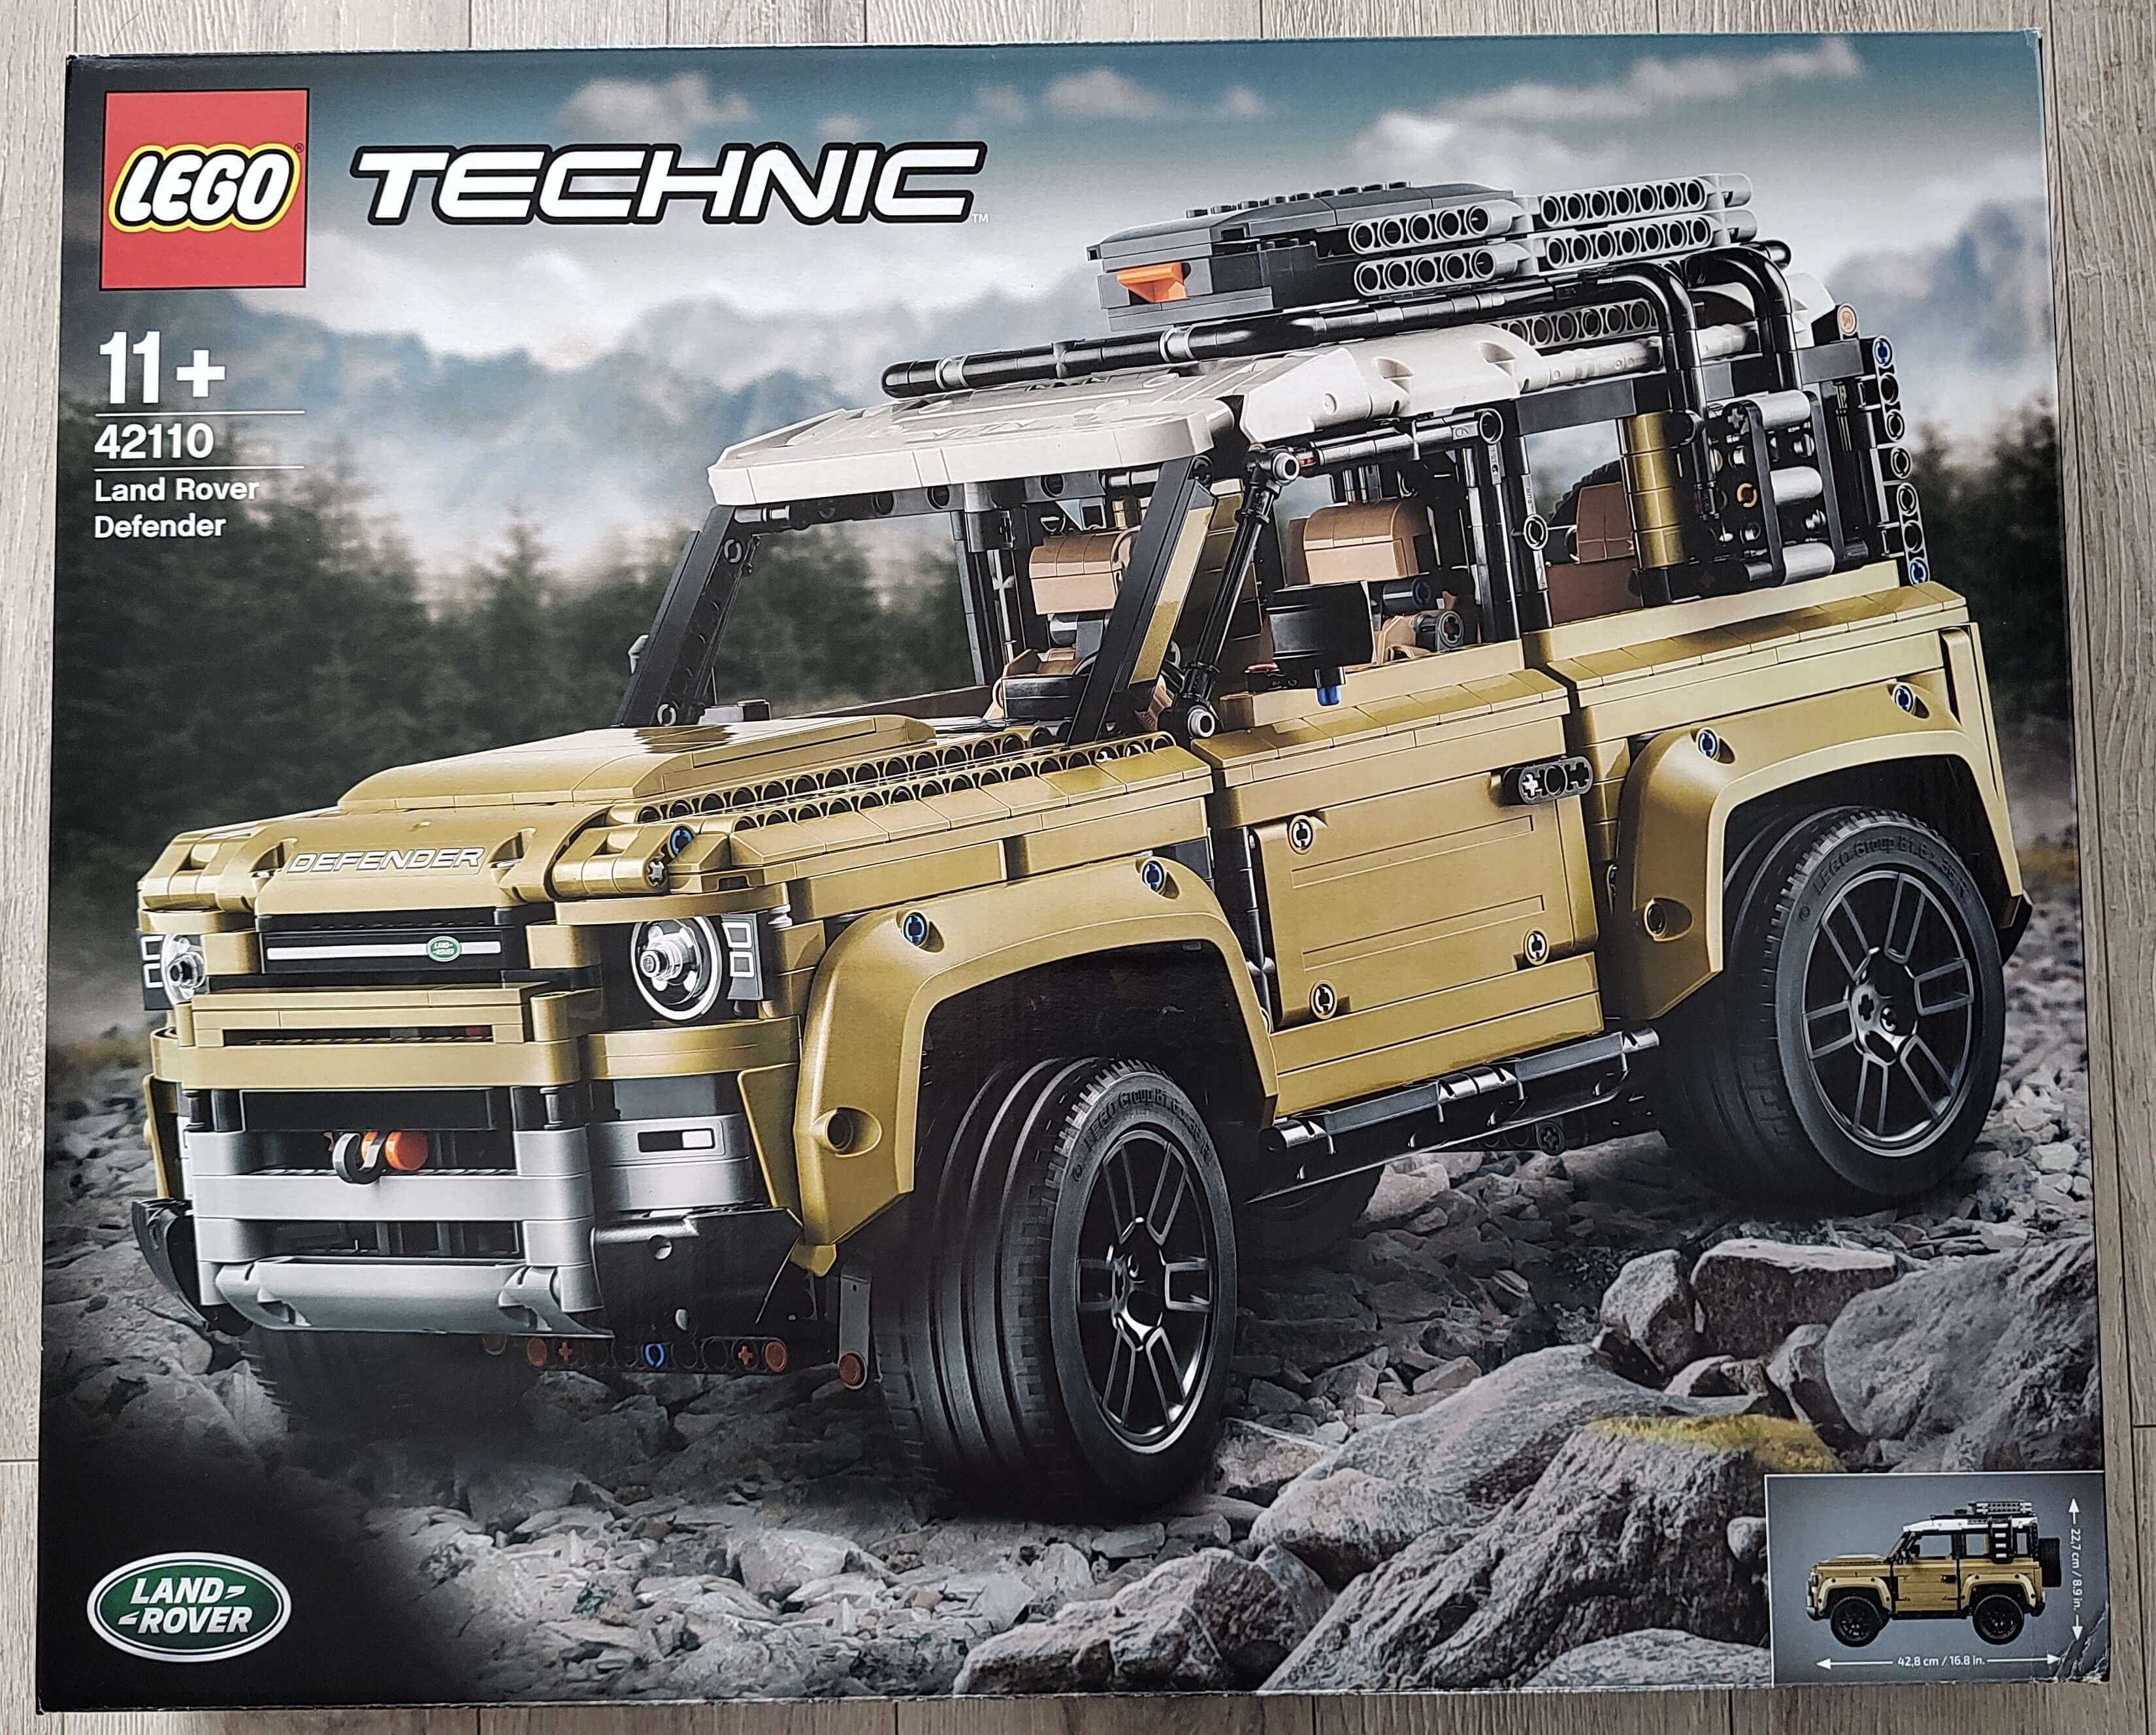 Lego Technic 42110 Land Rover Defender - nowy, MISB